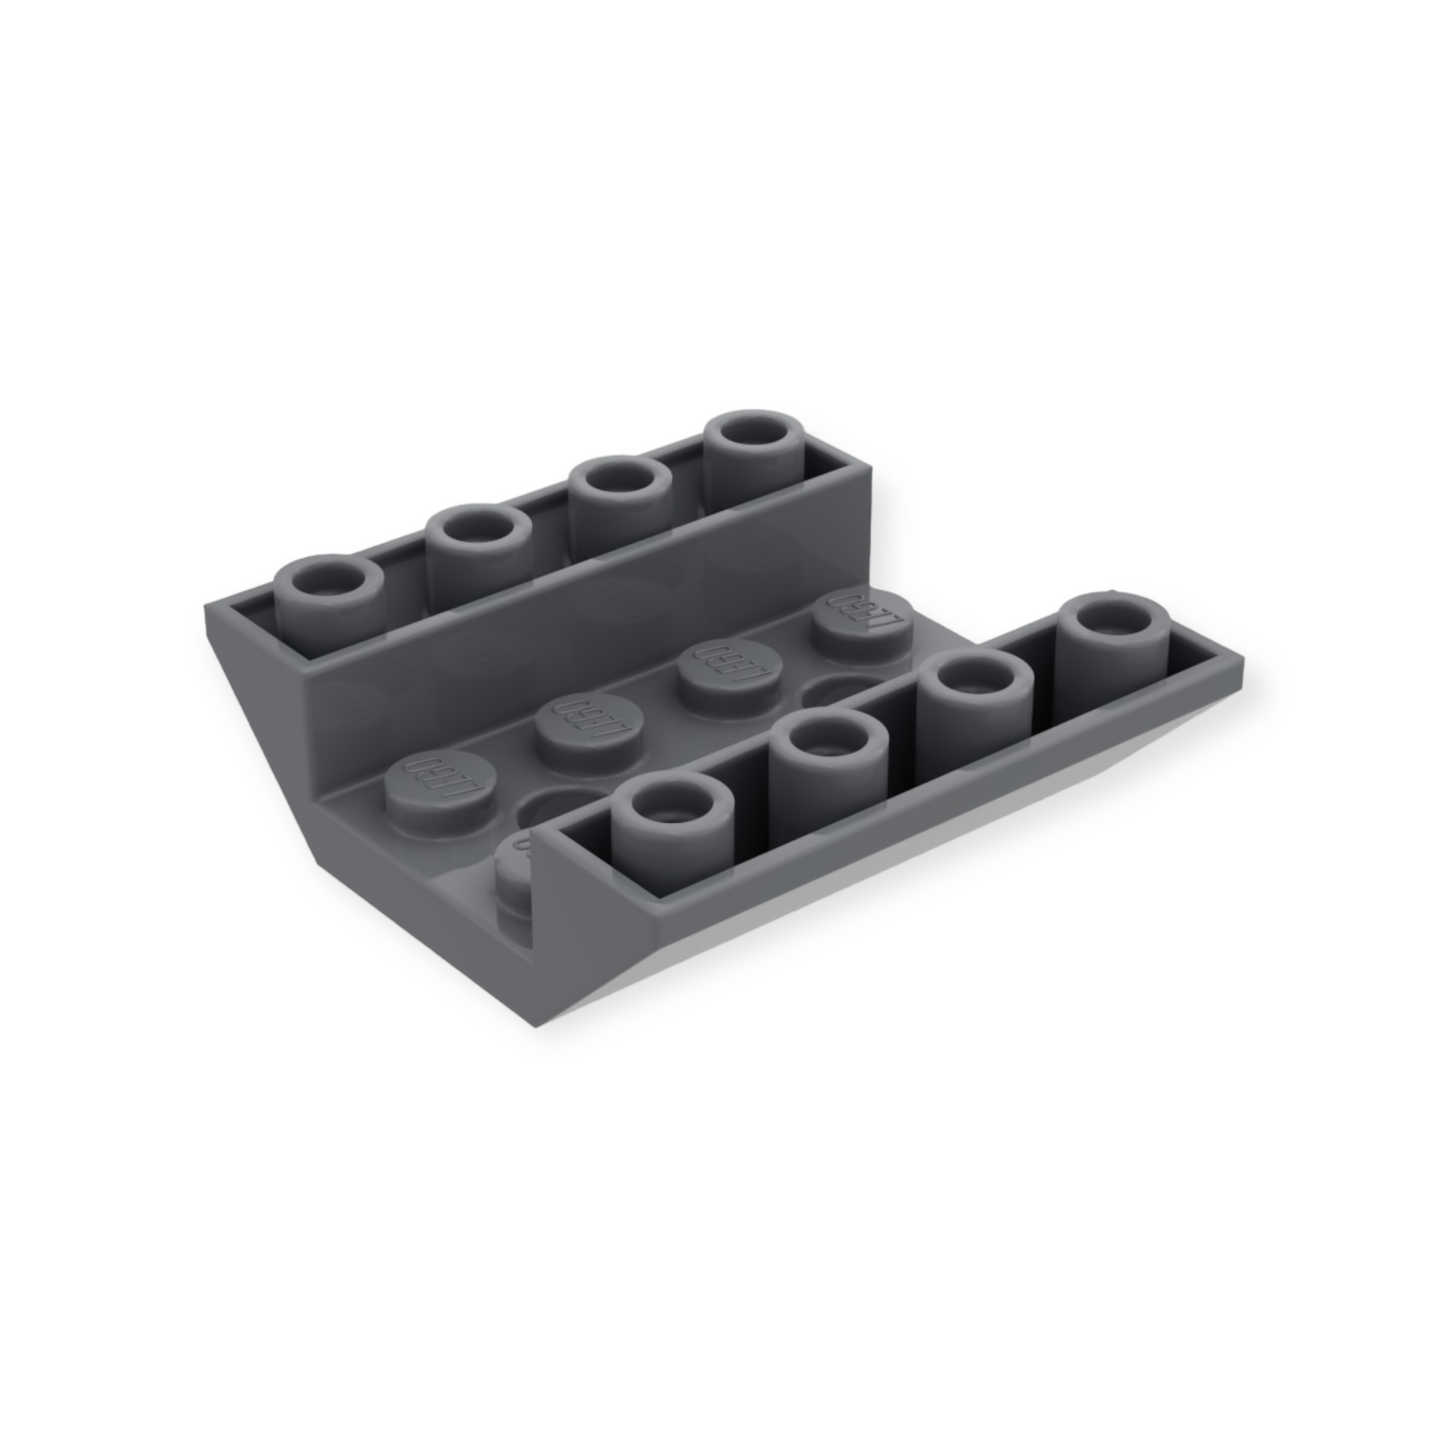 LEGO Slope Inverted 45 4x4 Double with 2 Holes - in Dark Bluish Gray